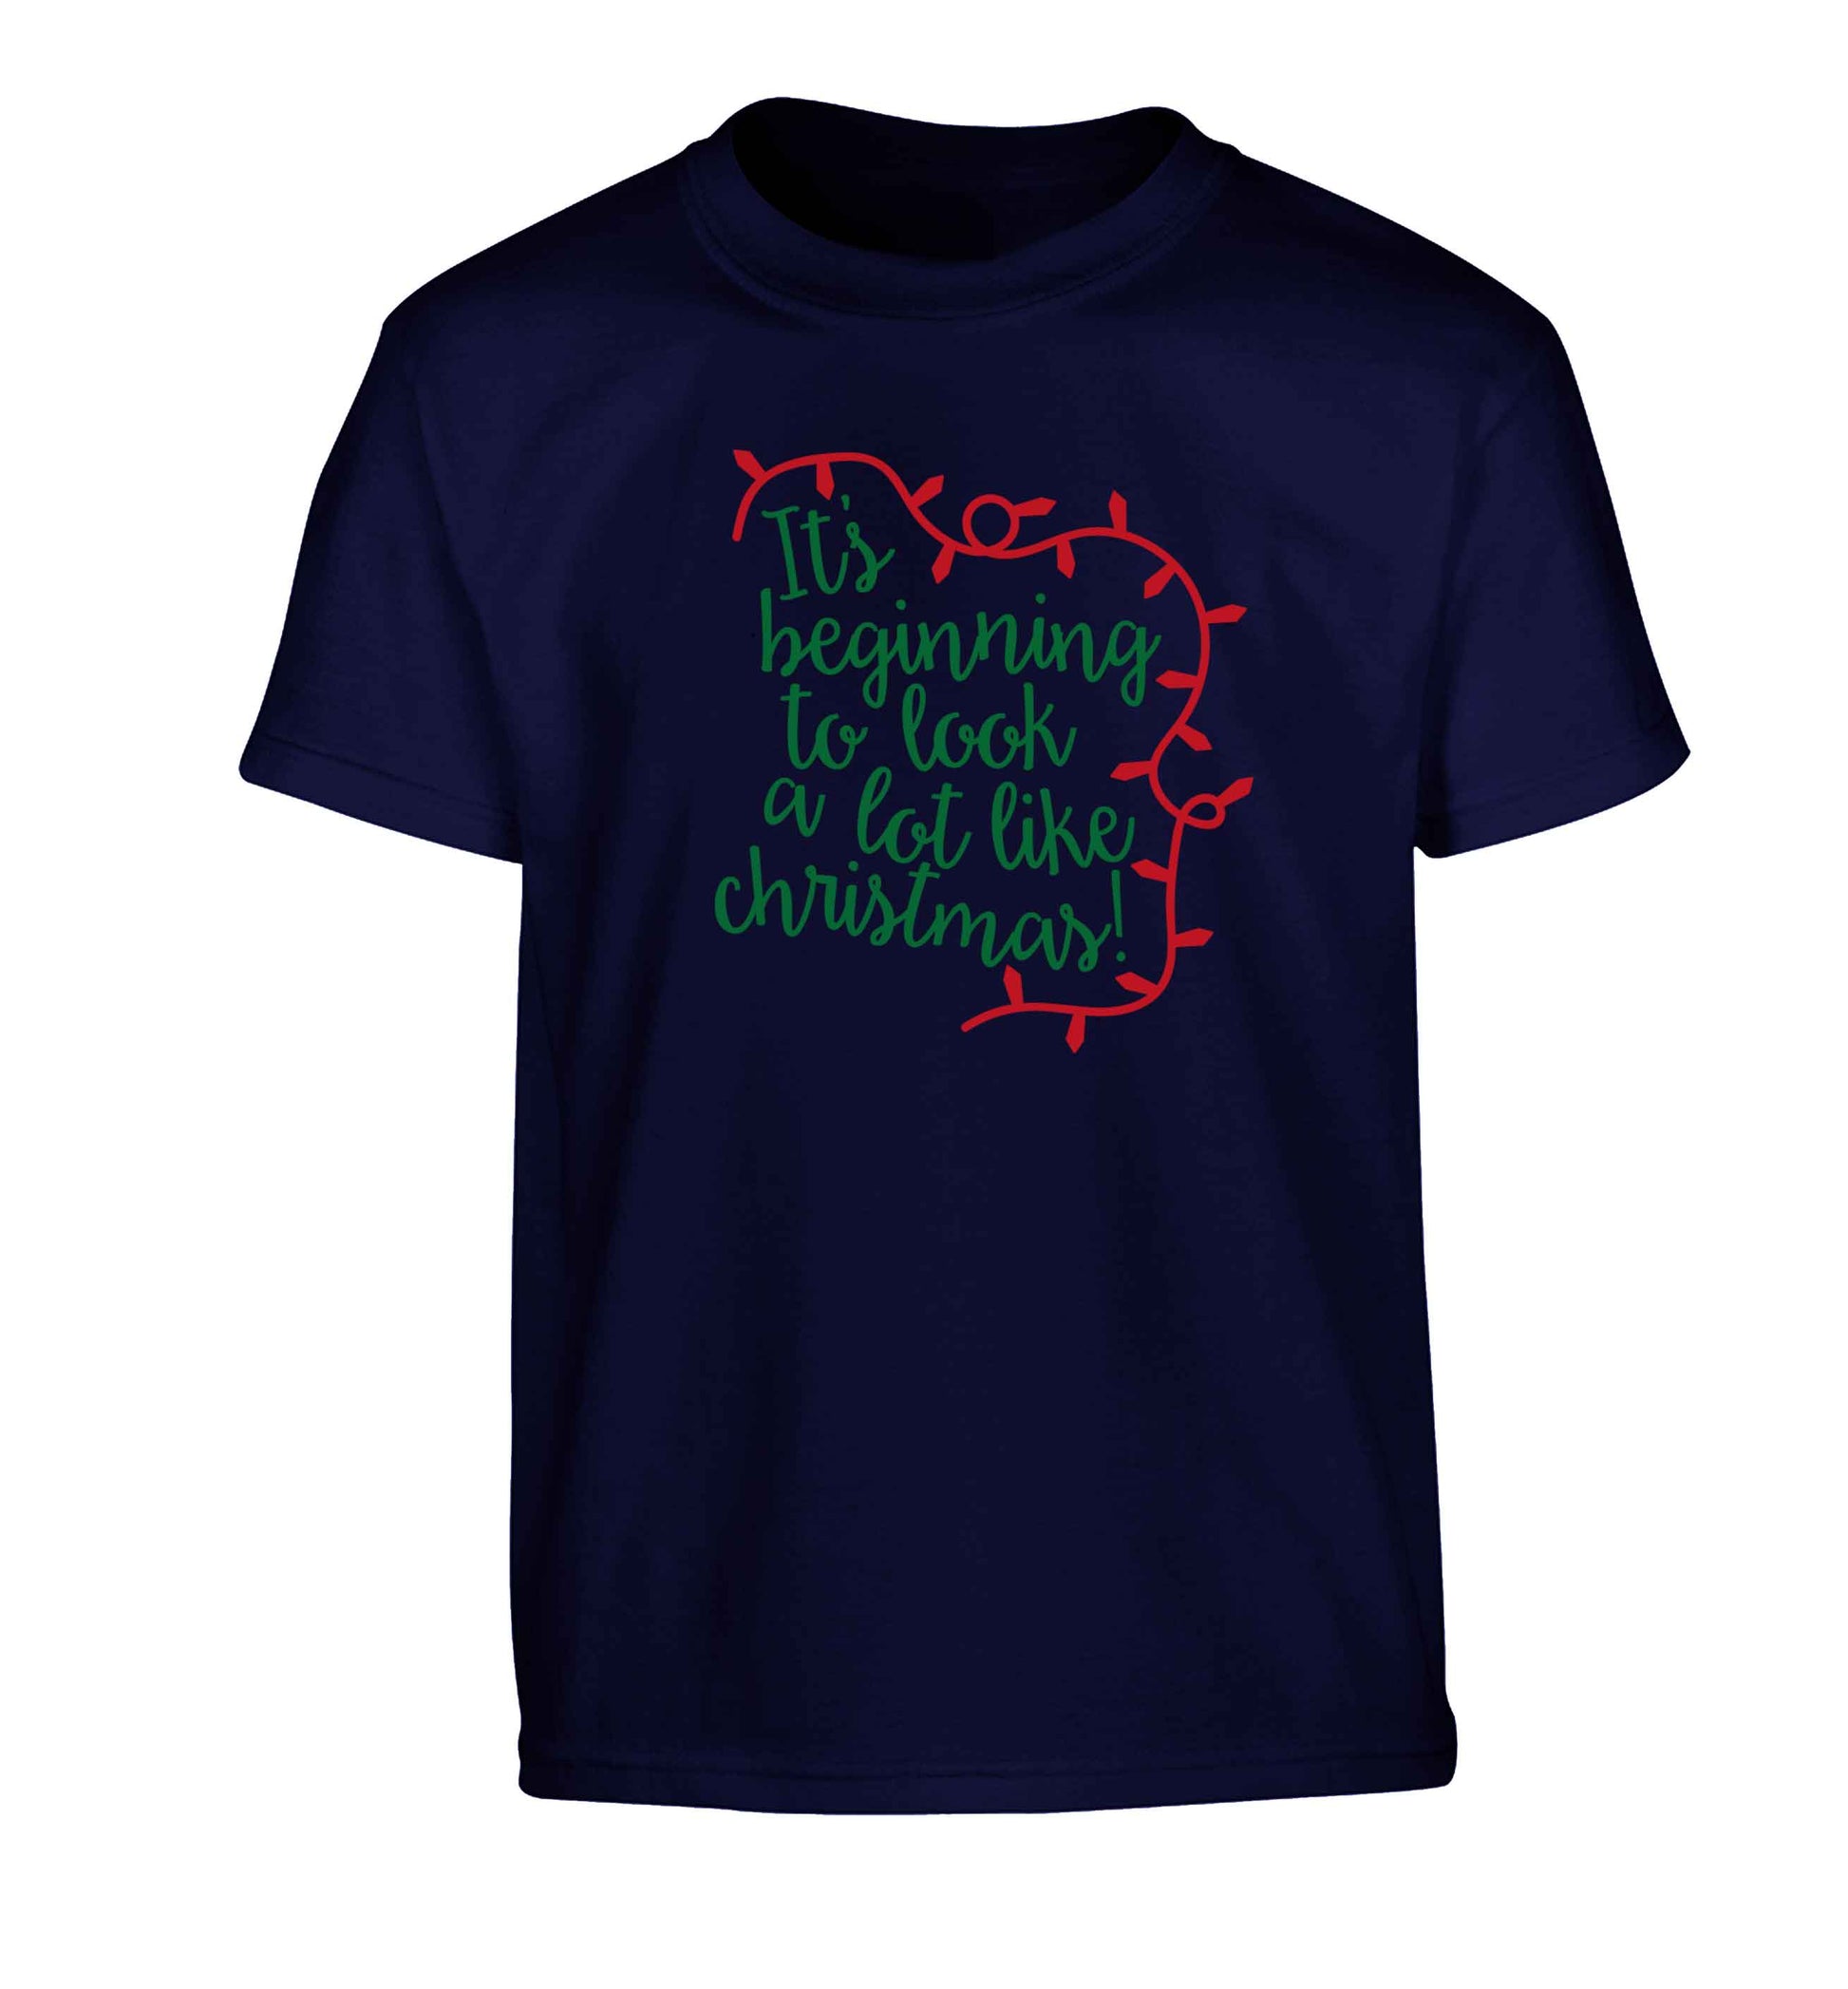 It's beginning to look a lot like Christmas Children's navy Tshirt 12-13 Years